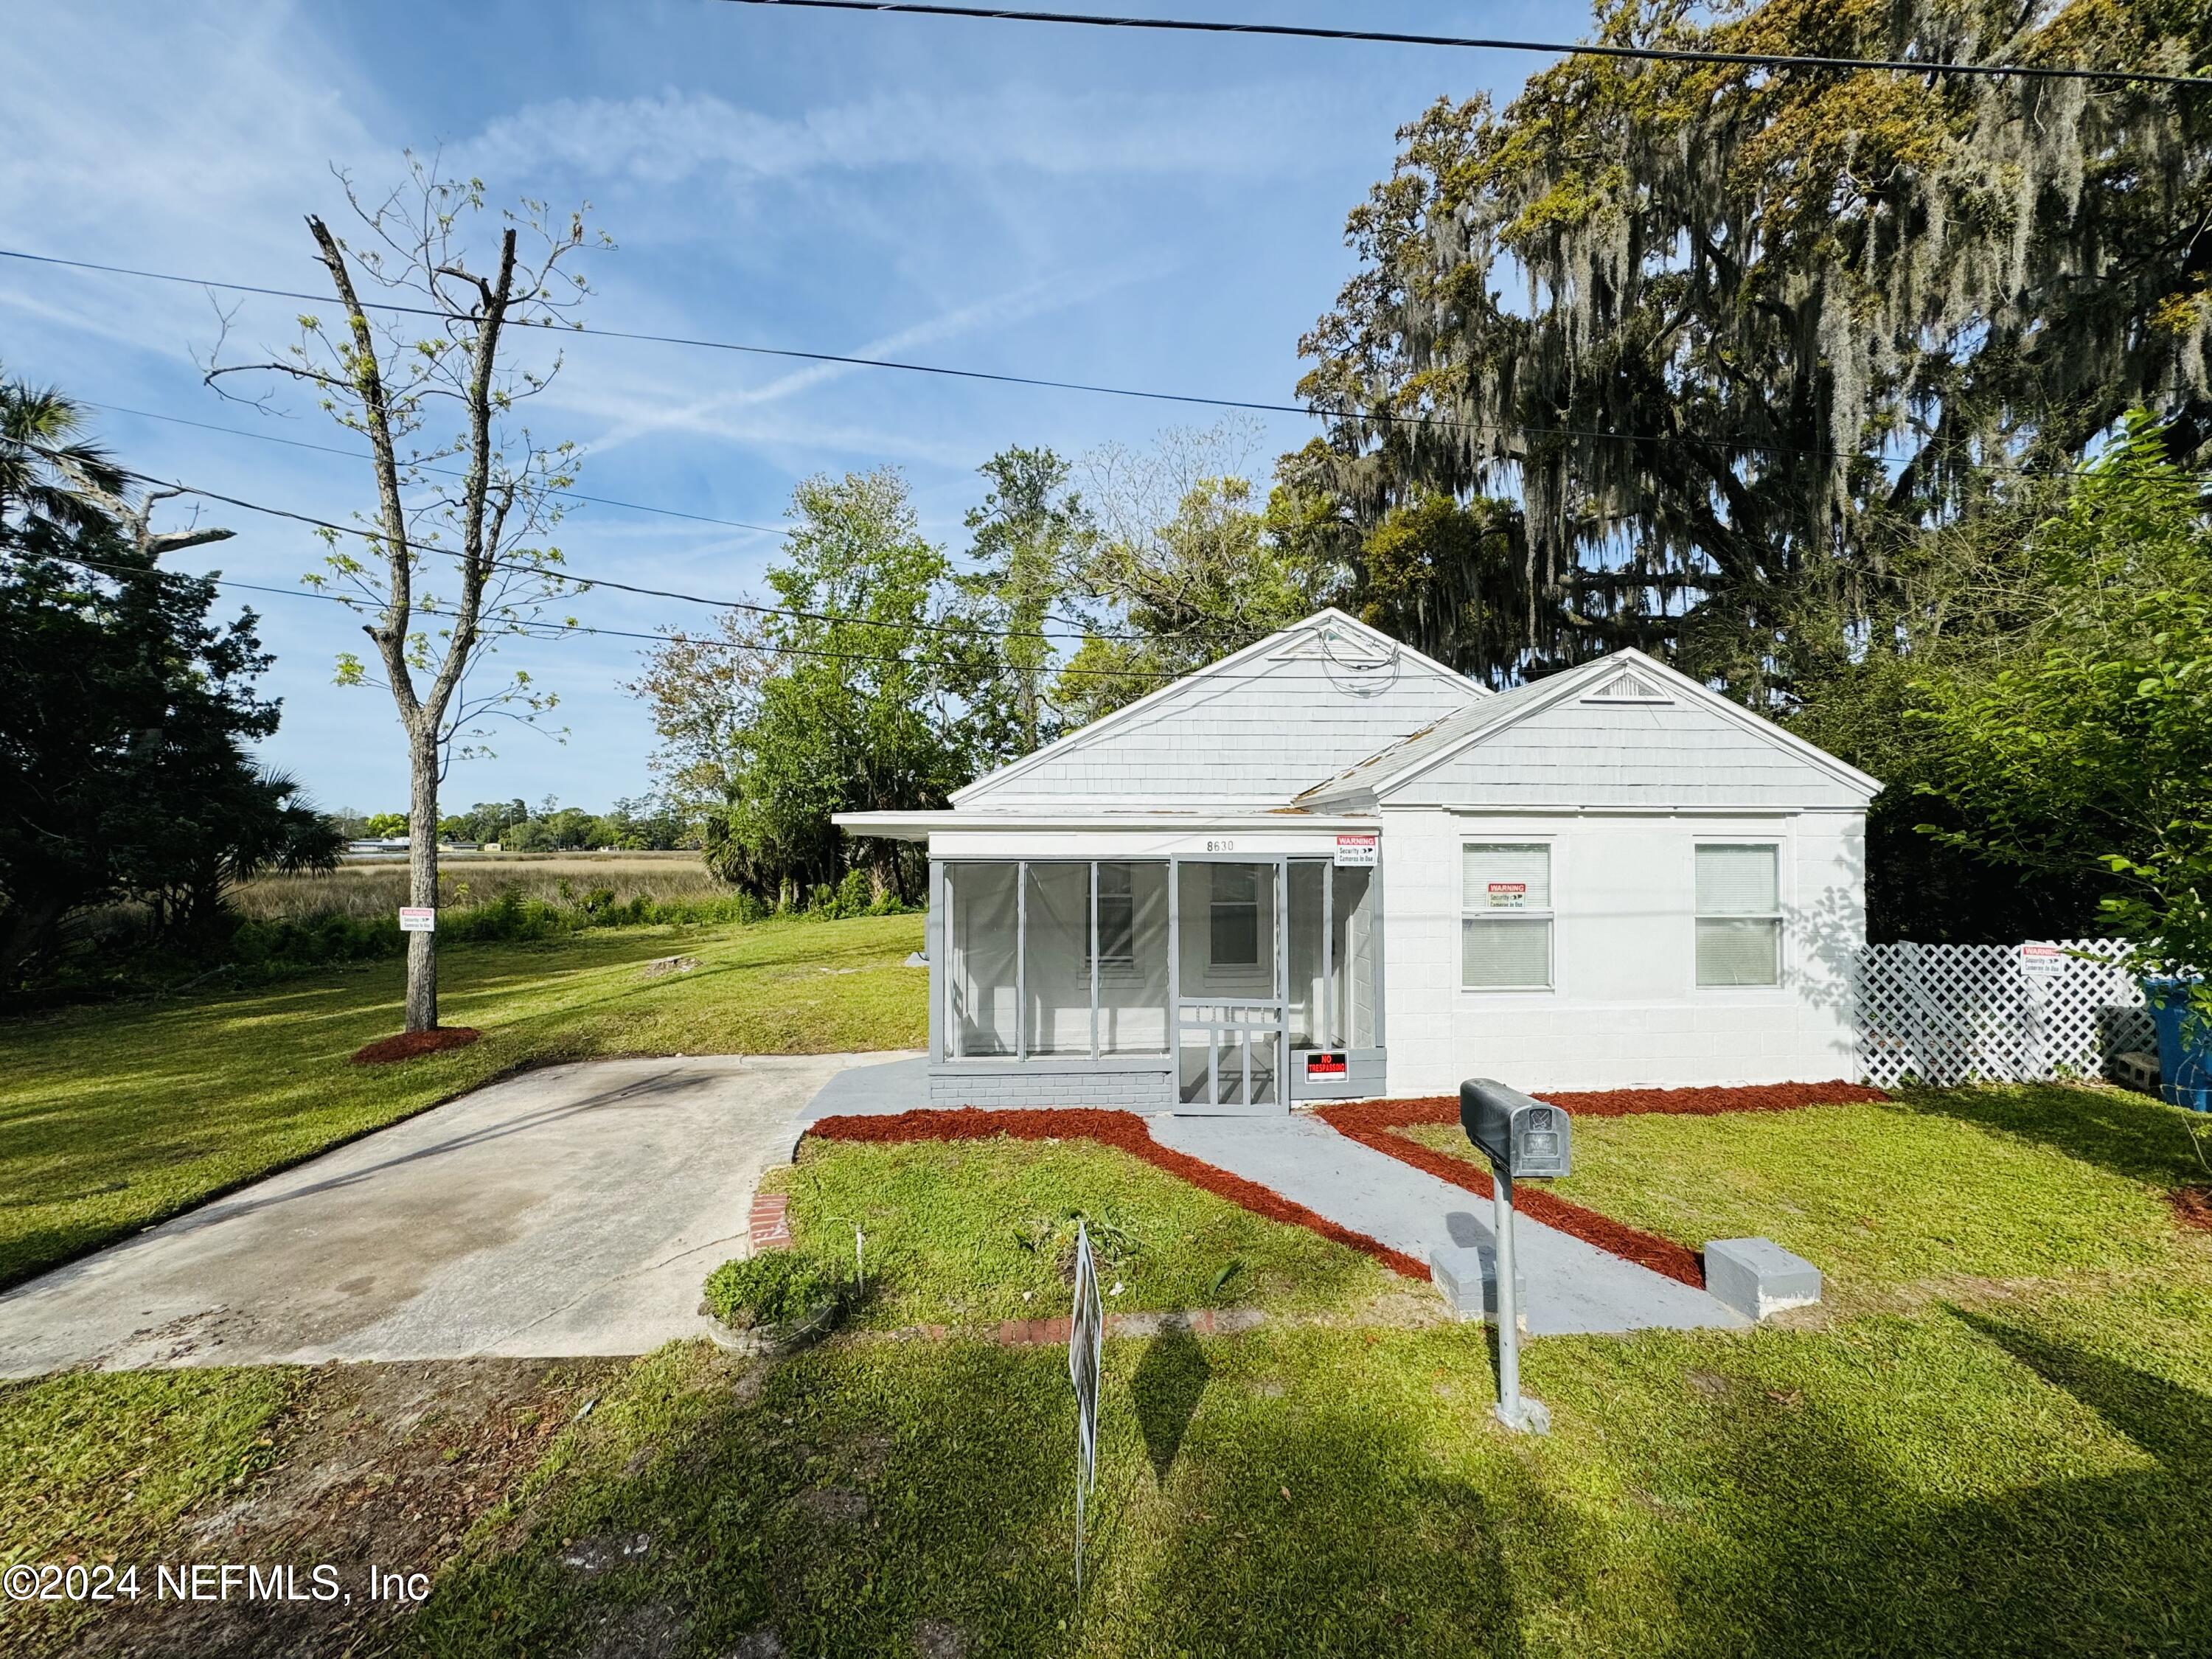 Jacksonville, FL home for sale located at 8630 4th Avenue, Jacksonville, FL 32208